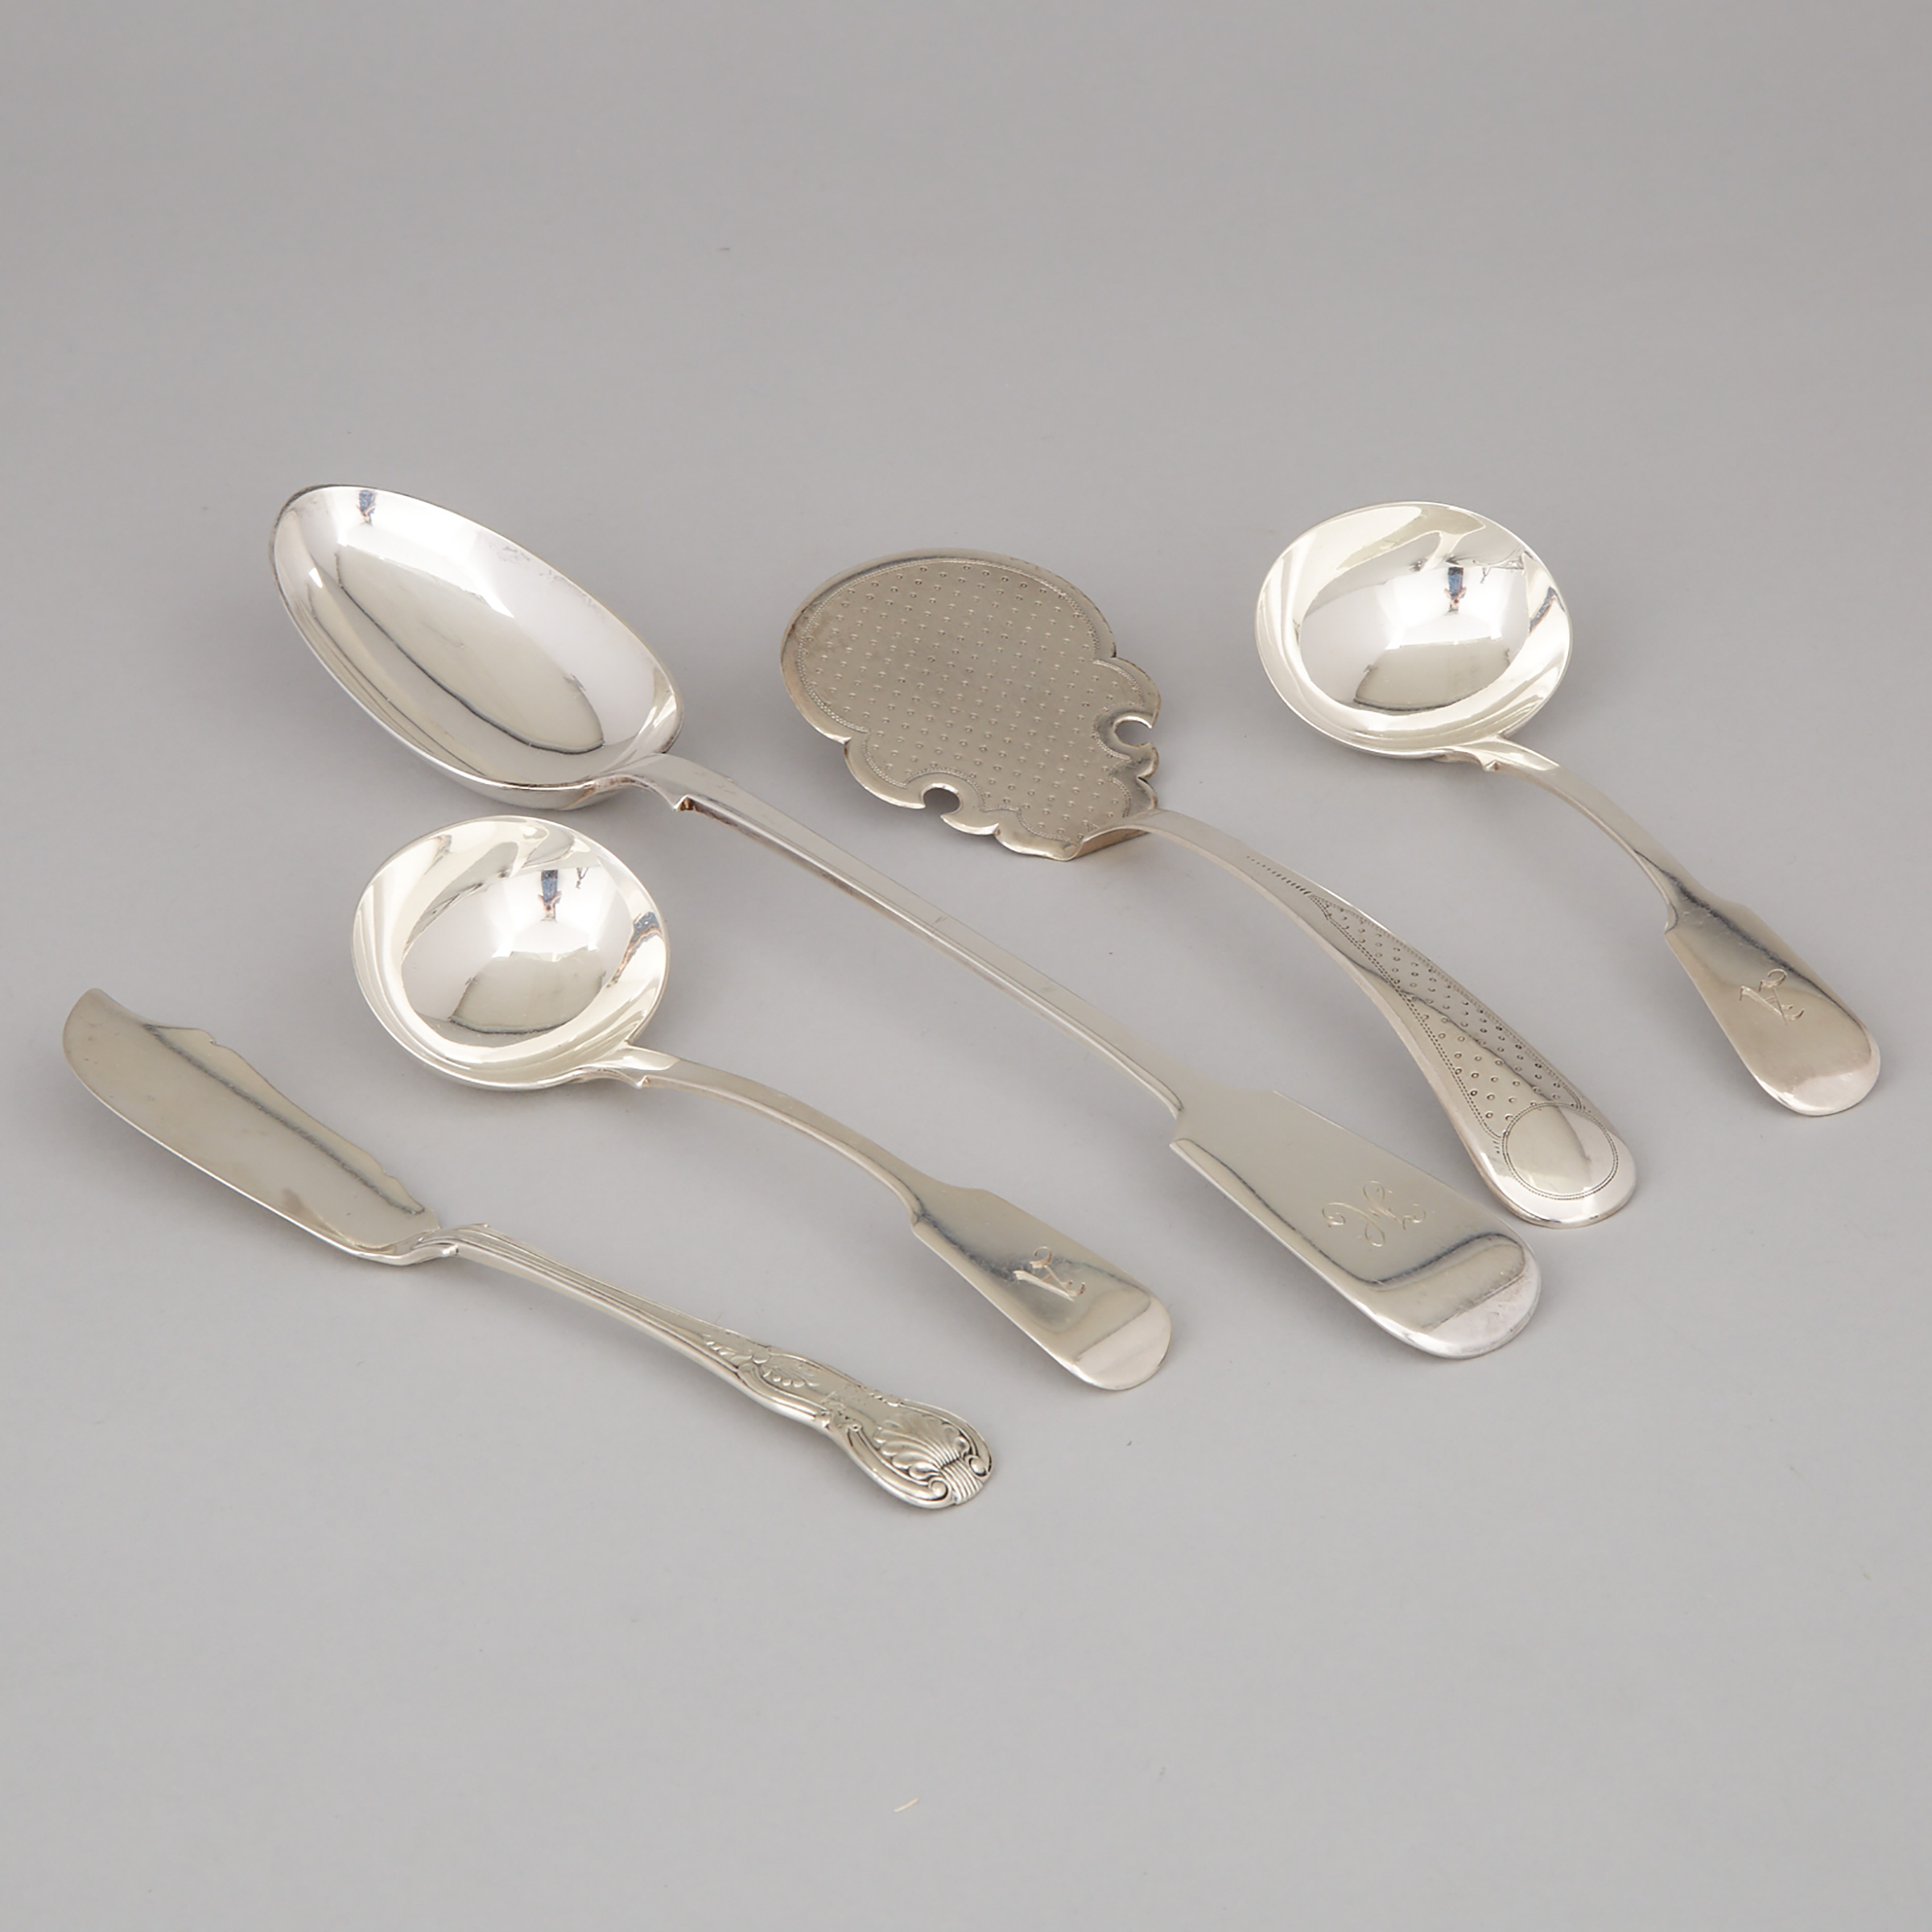 William IV Irish Silver Kings Pattern Butter Knife, Philip Weekes, Dublin, 1833, Pair of Fiddle Pattern Gravy Ladles, John, Henry & Charles Lias, London, 1835, Victorian Serving Spoon, Francis Higgins, 1861 and a Dutch Pastry Server, 1873